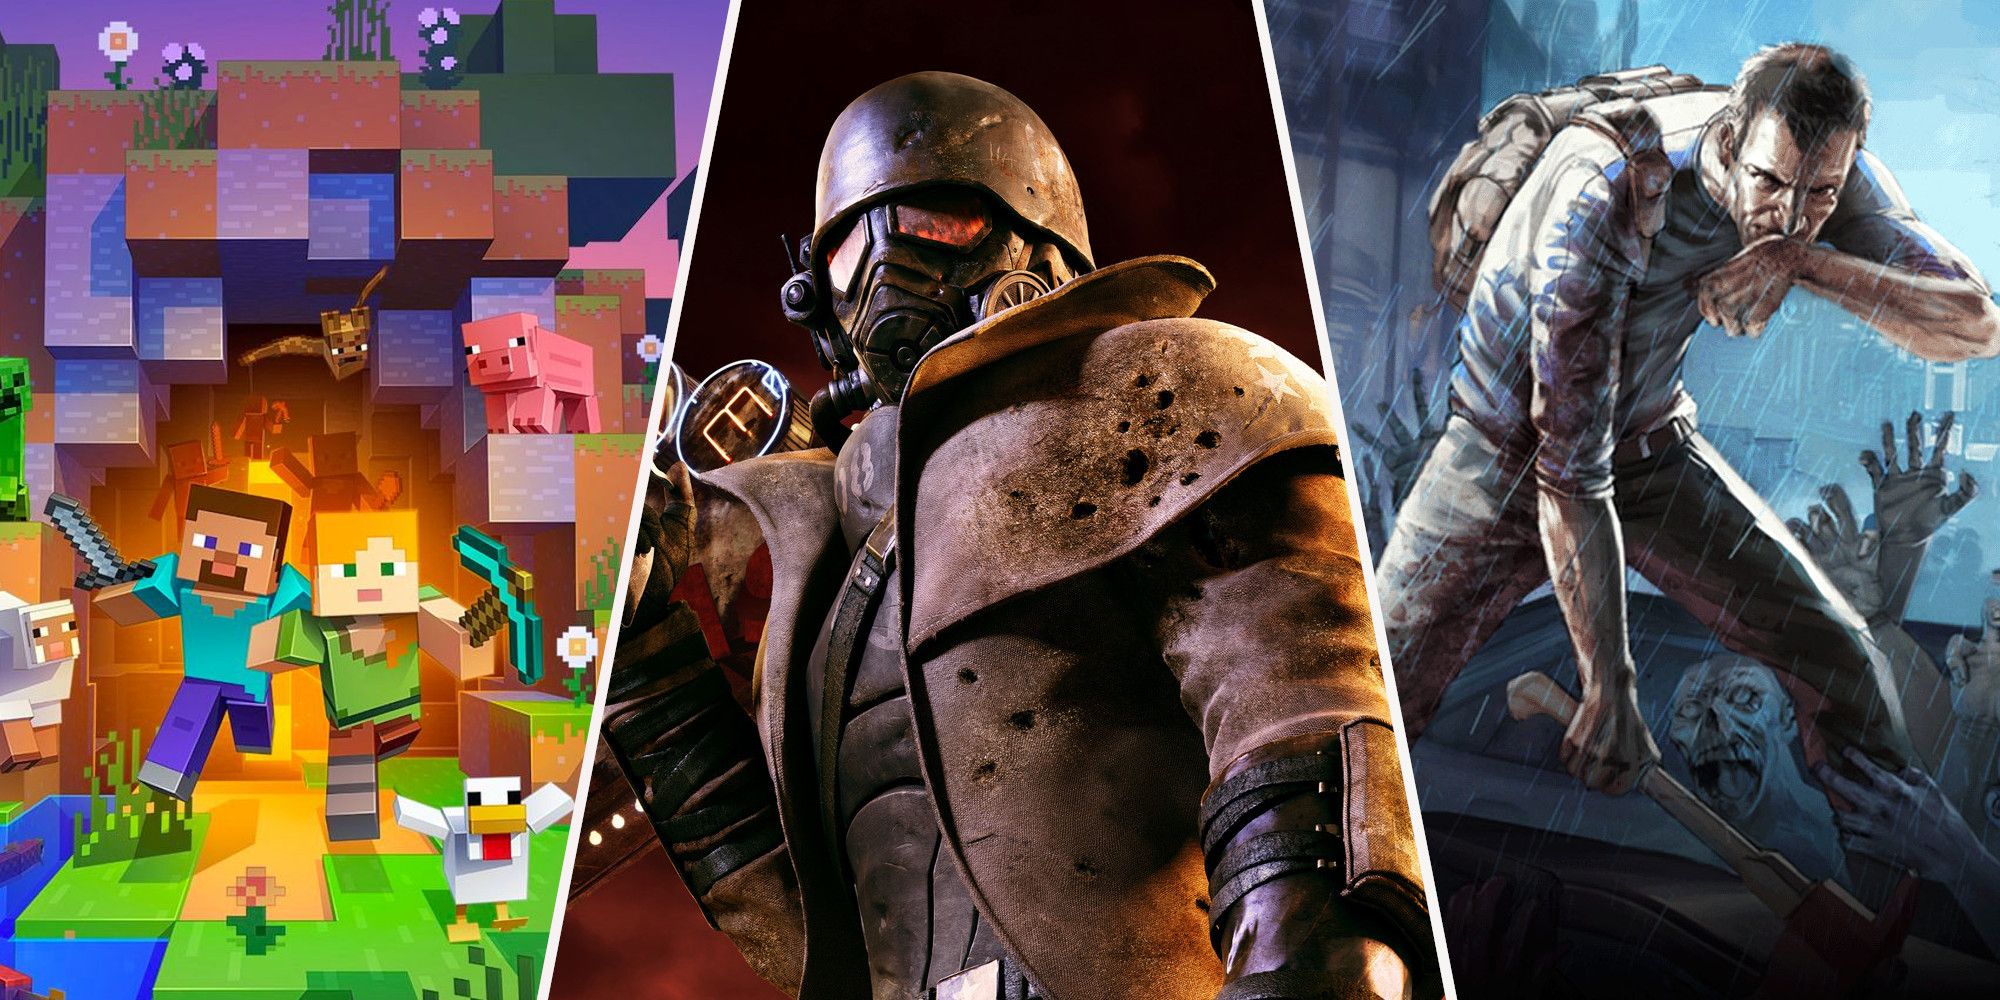 10 Games That Seem Easy To Beat But Are Deceptively Difficult